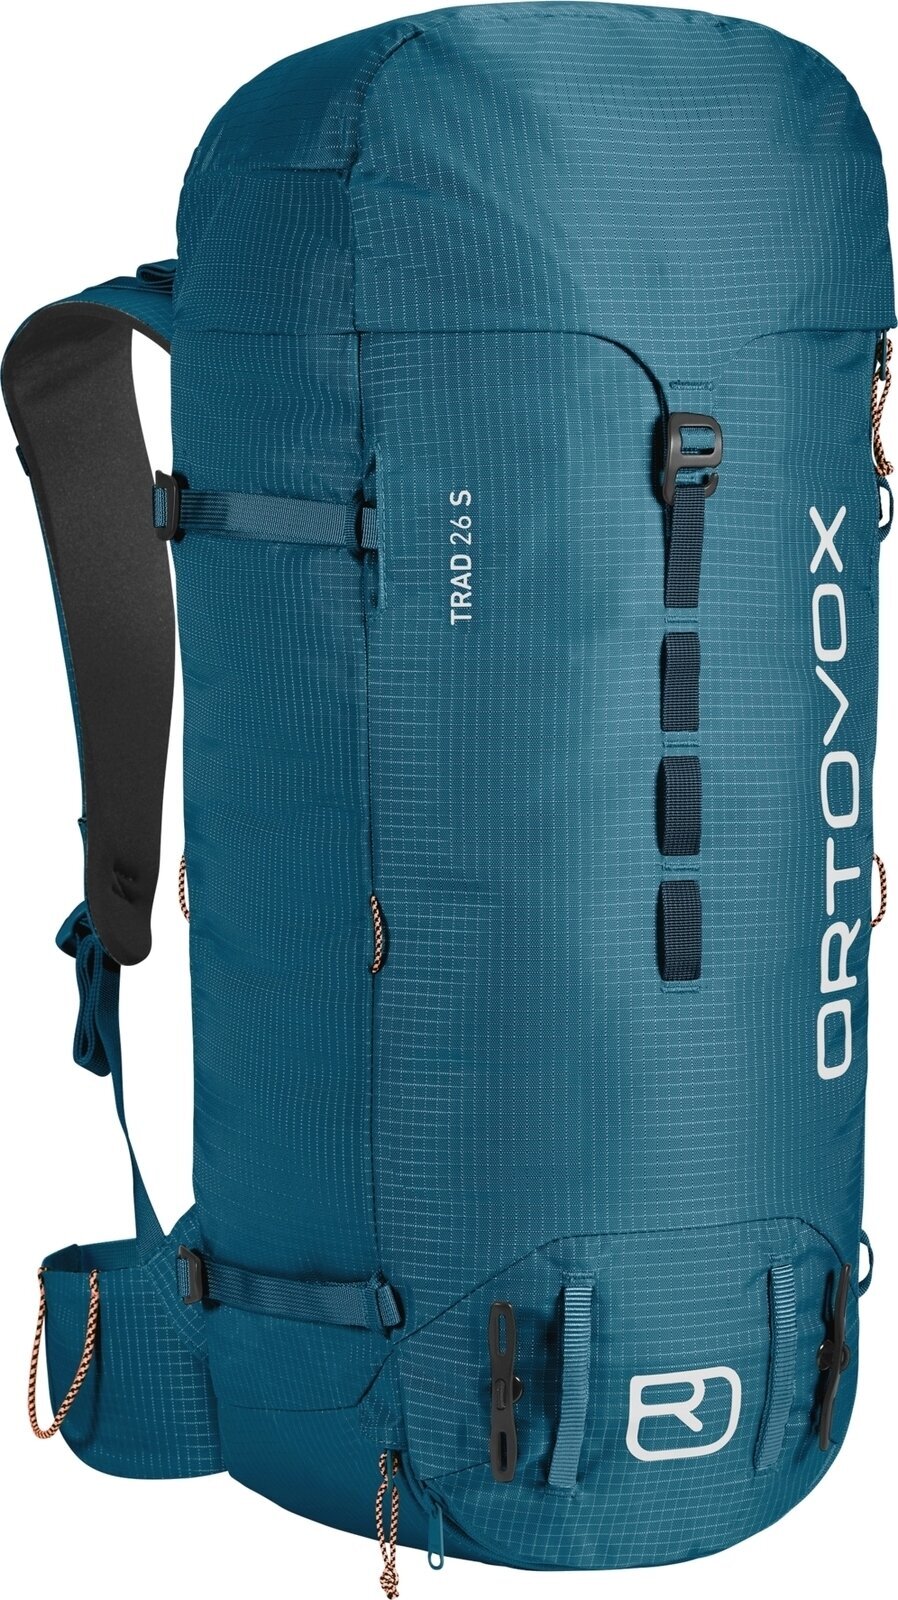 Outdoor Backpack Ortovox Trad 26 S Outdoor Backpack